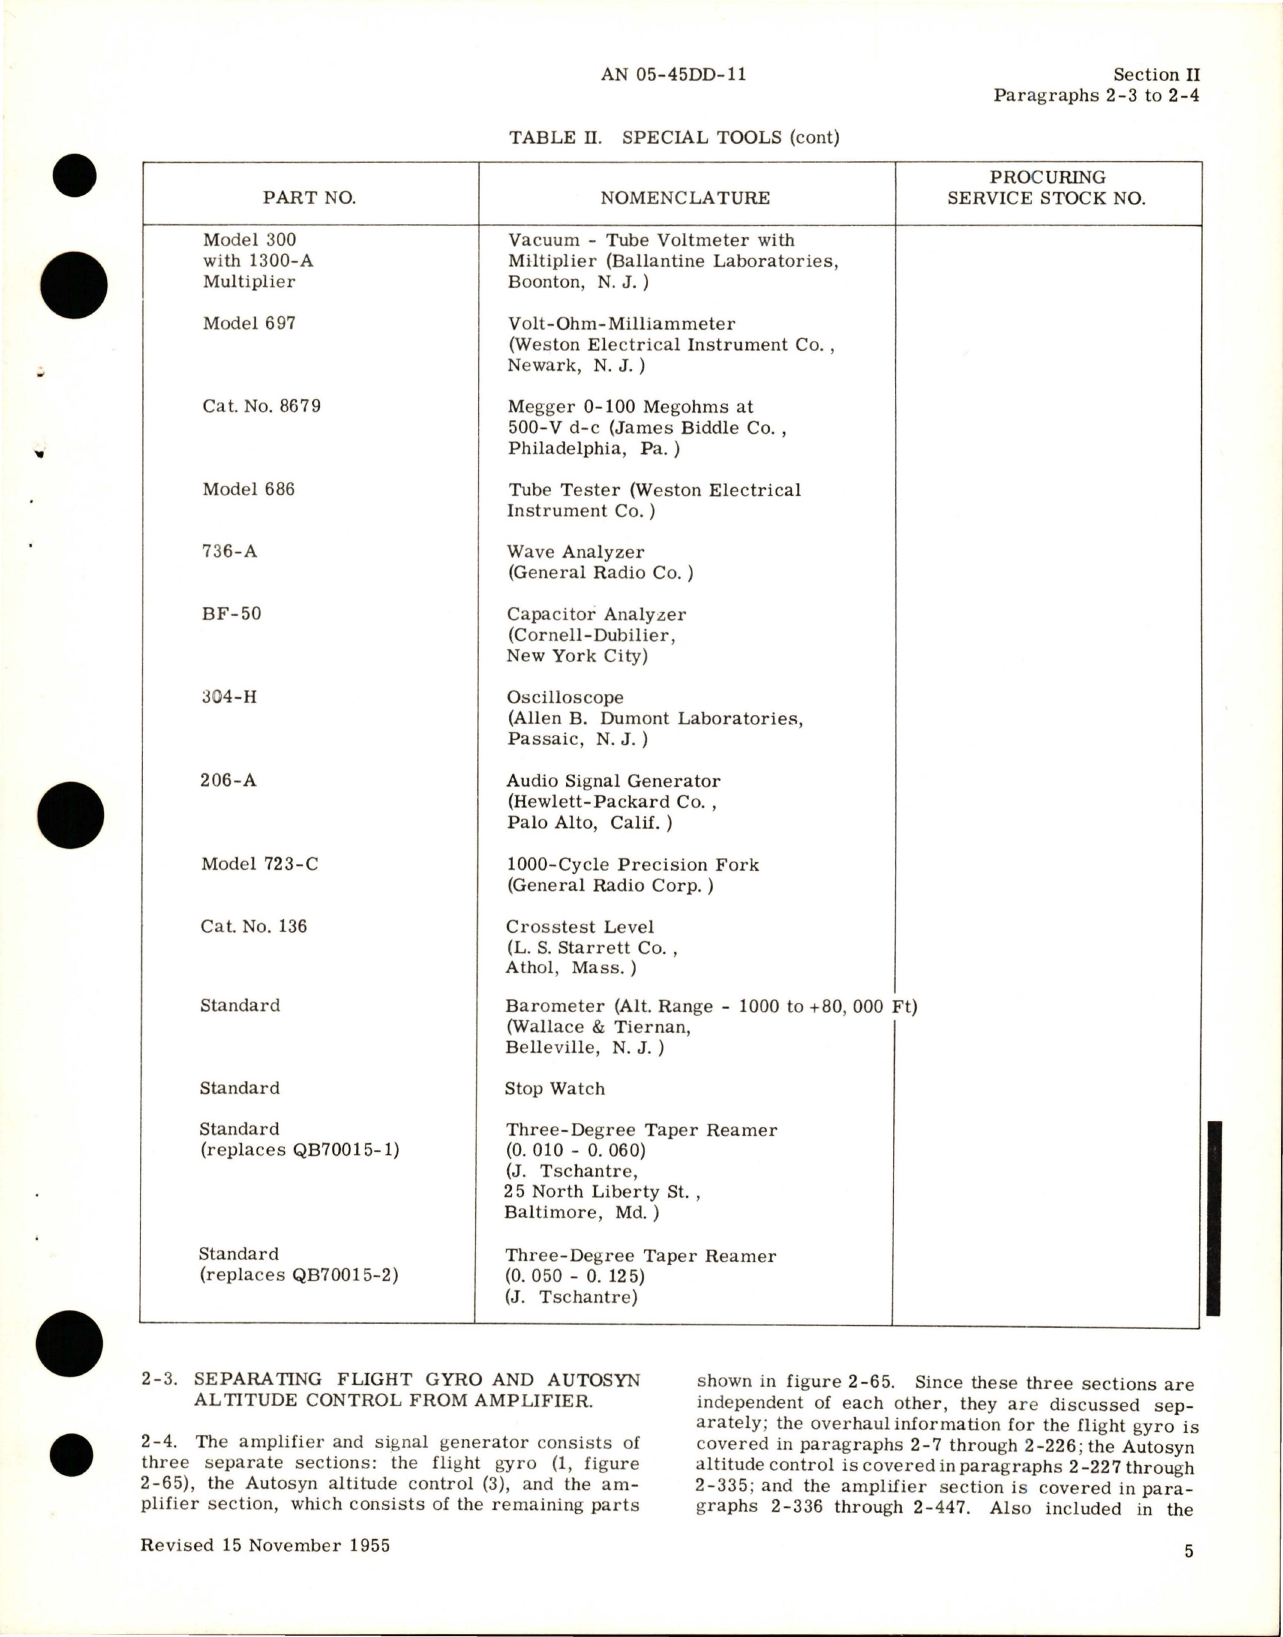 Sample page 9 from AirCorps Library document: Overhaul Instructions for Amplifier and Signal Generator - Parts 15406-6-C-4, 15406-6-D-4, 15406-6-E-4, and 15406-6-E-6